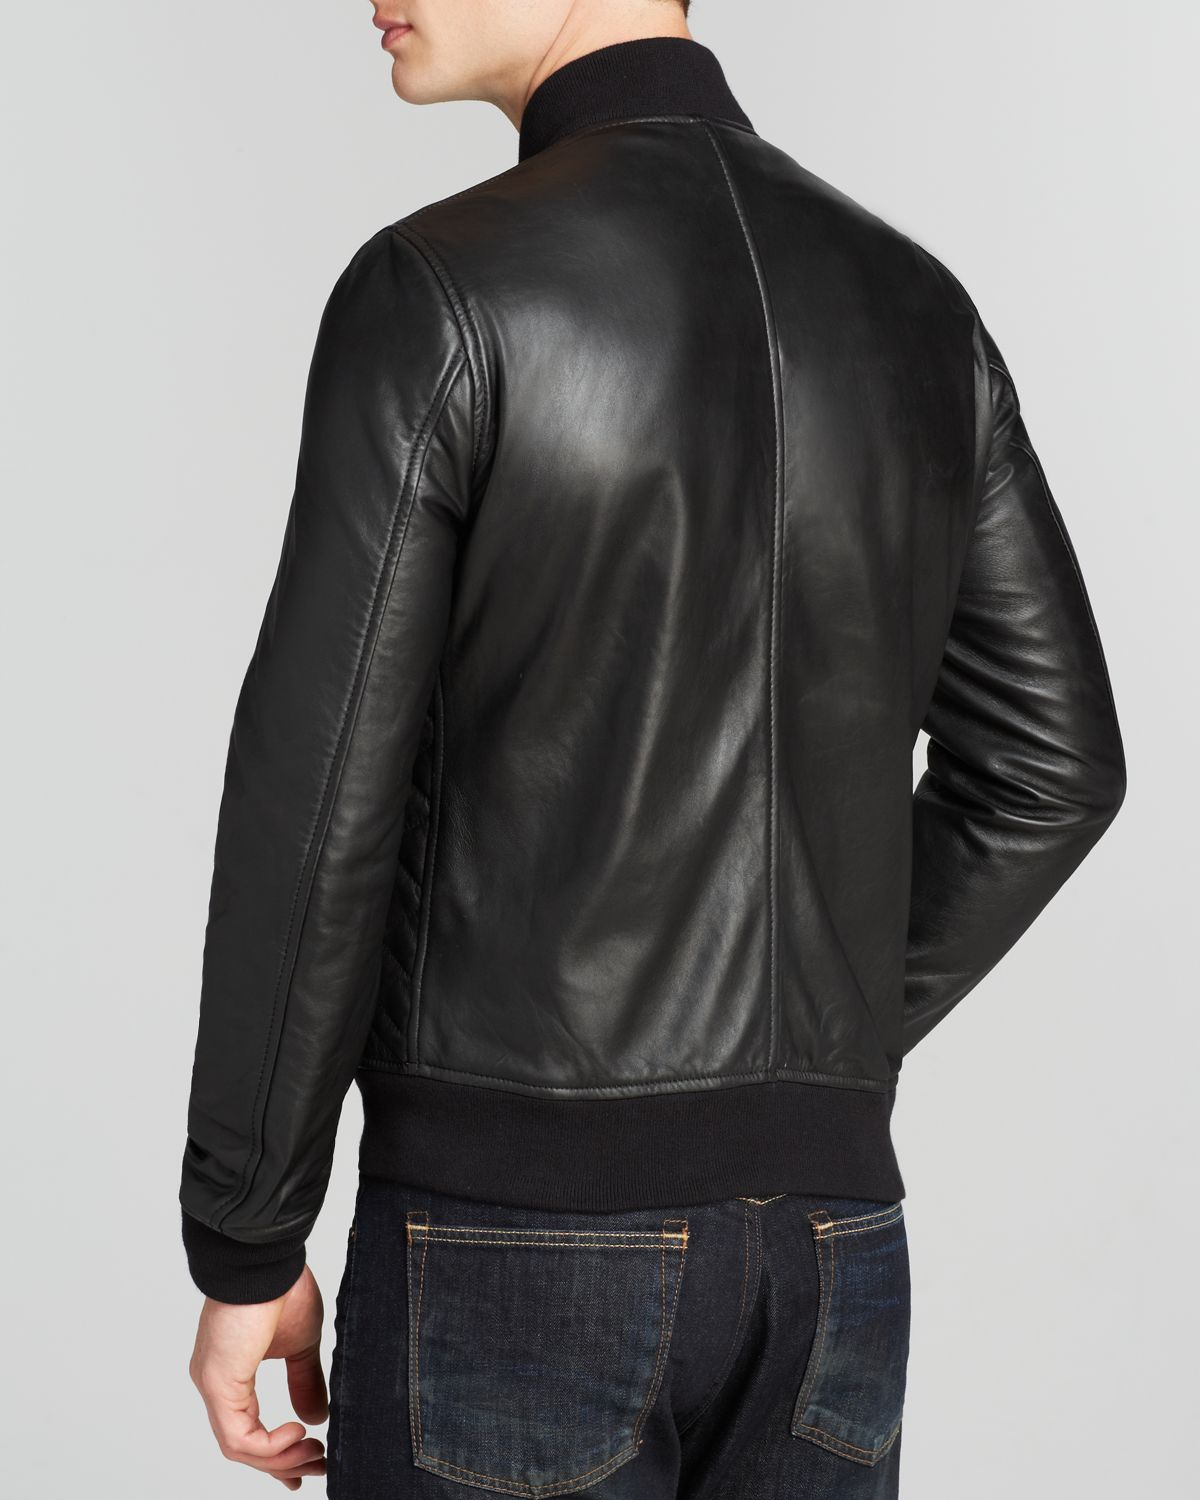 Paul Smith Quilted Leather Jacket in Black for Men - Lyst